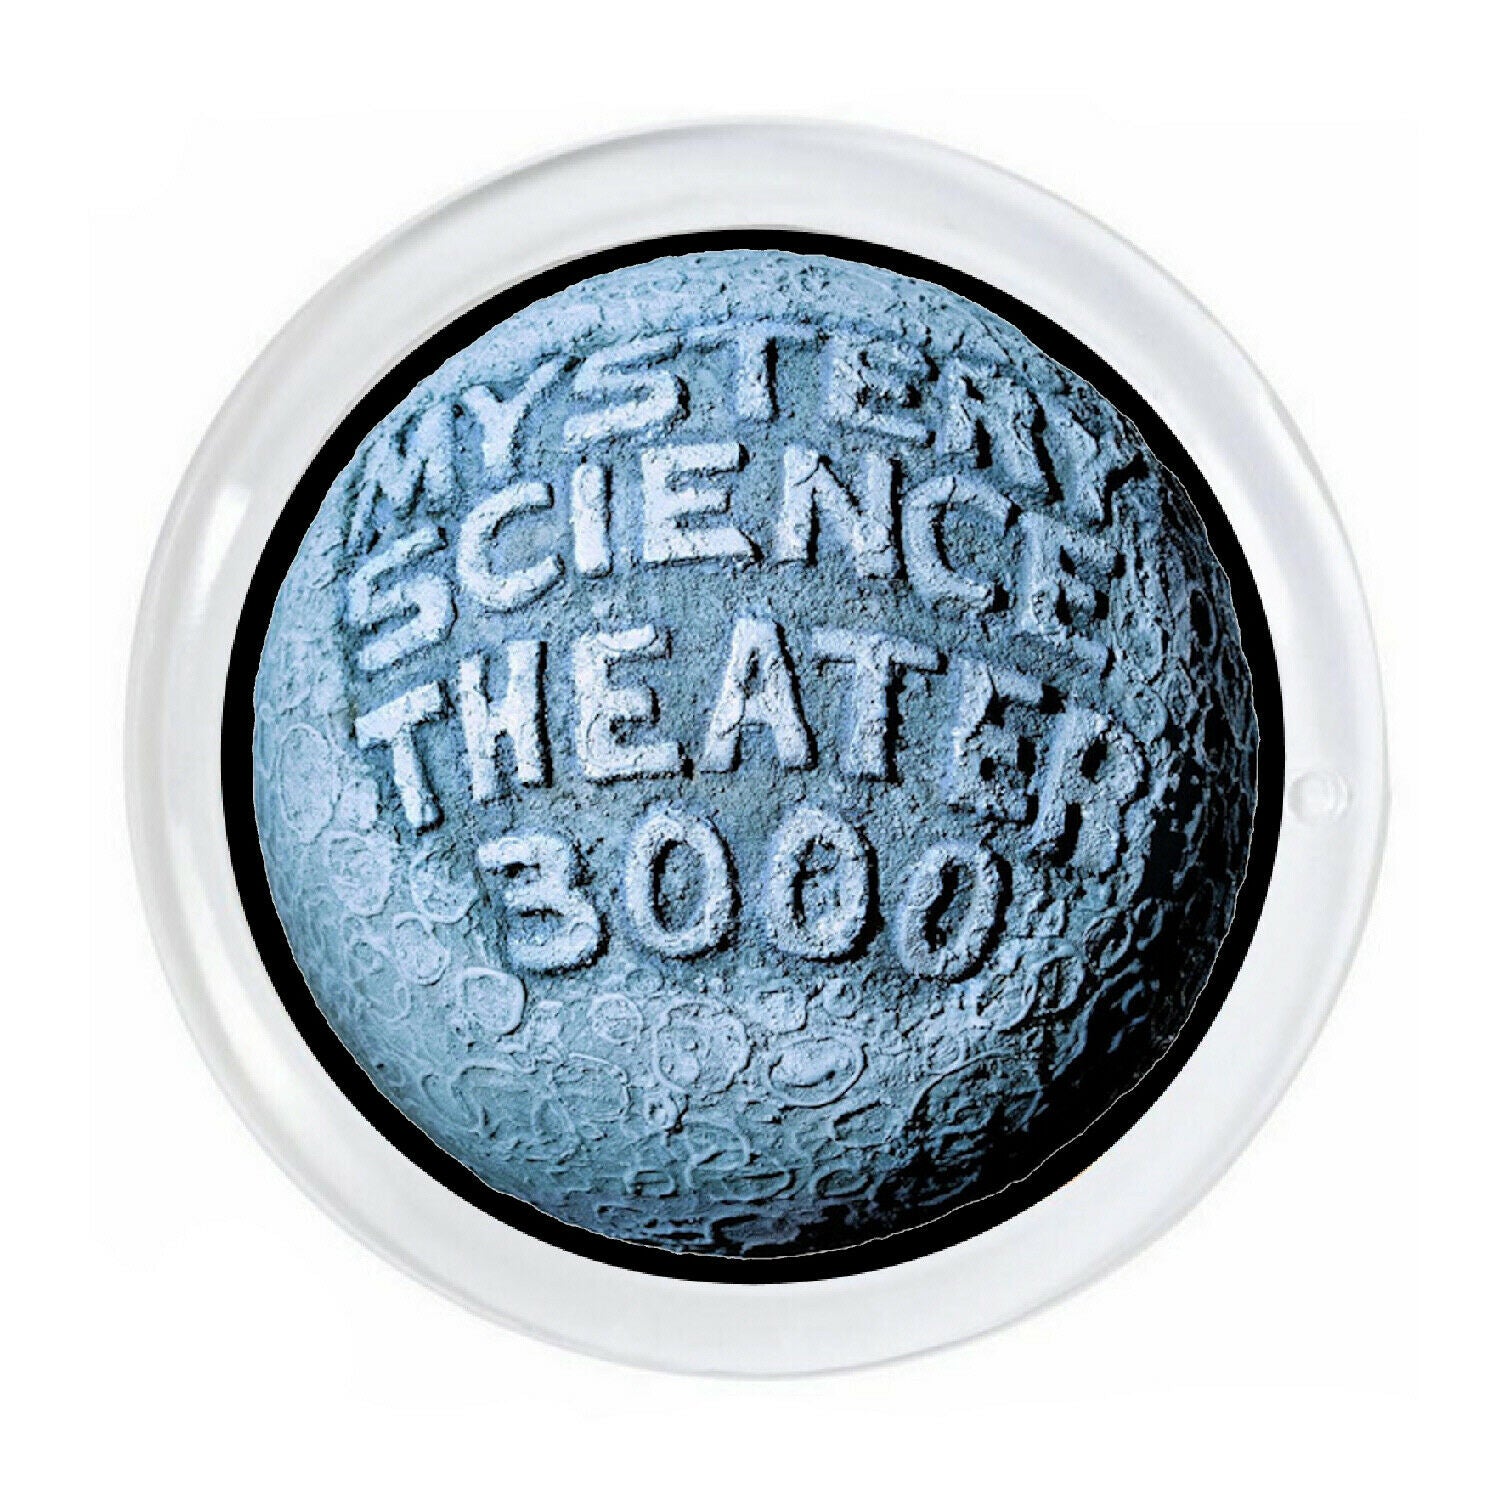 Mystery Science Theater 3000 MST3K Magnet big round <3 inch diameter with border